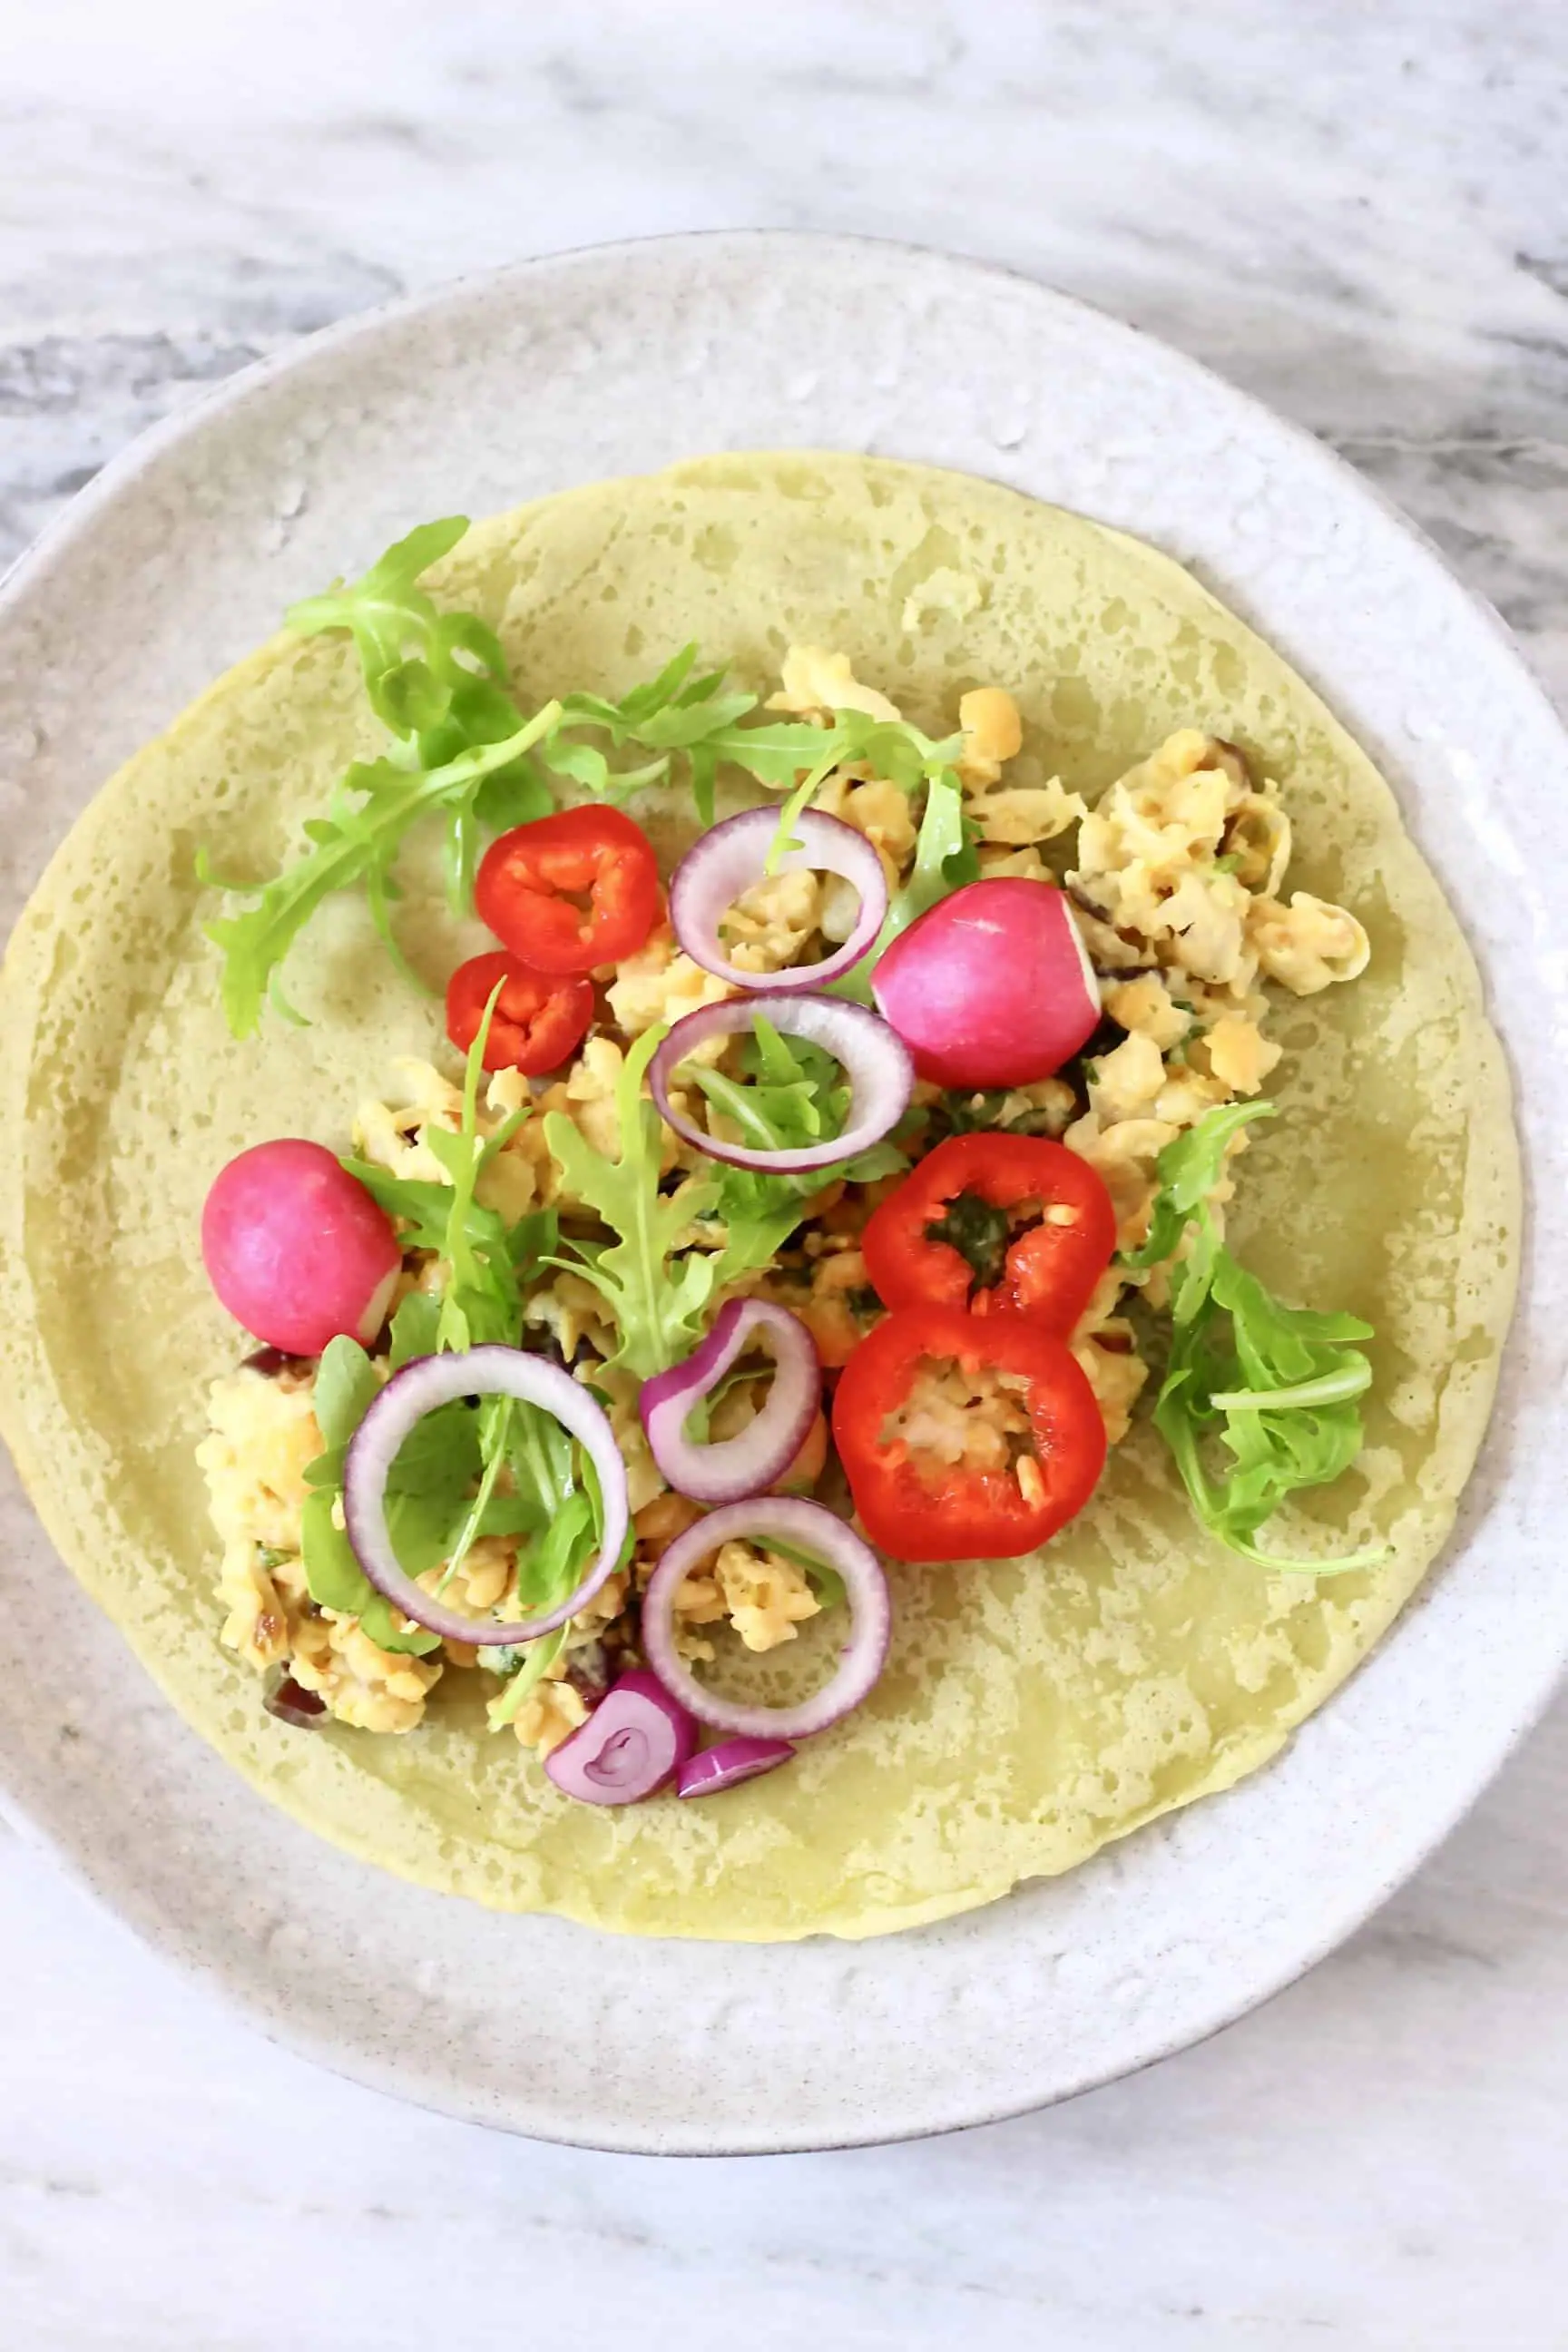 A green wrap on a plate, topped with chickpeas and salad